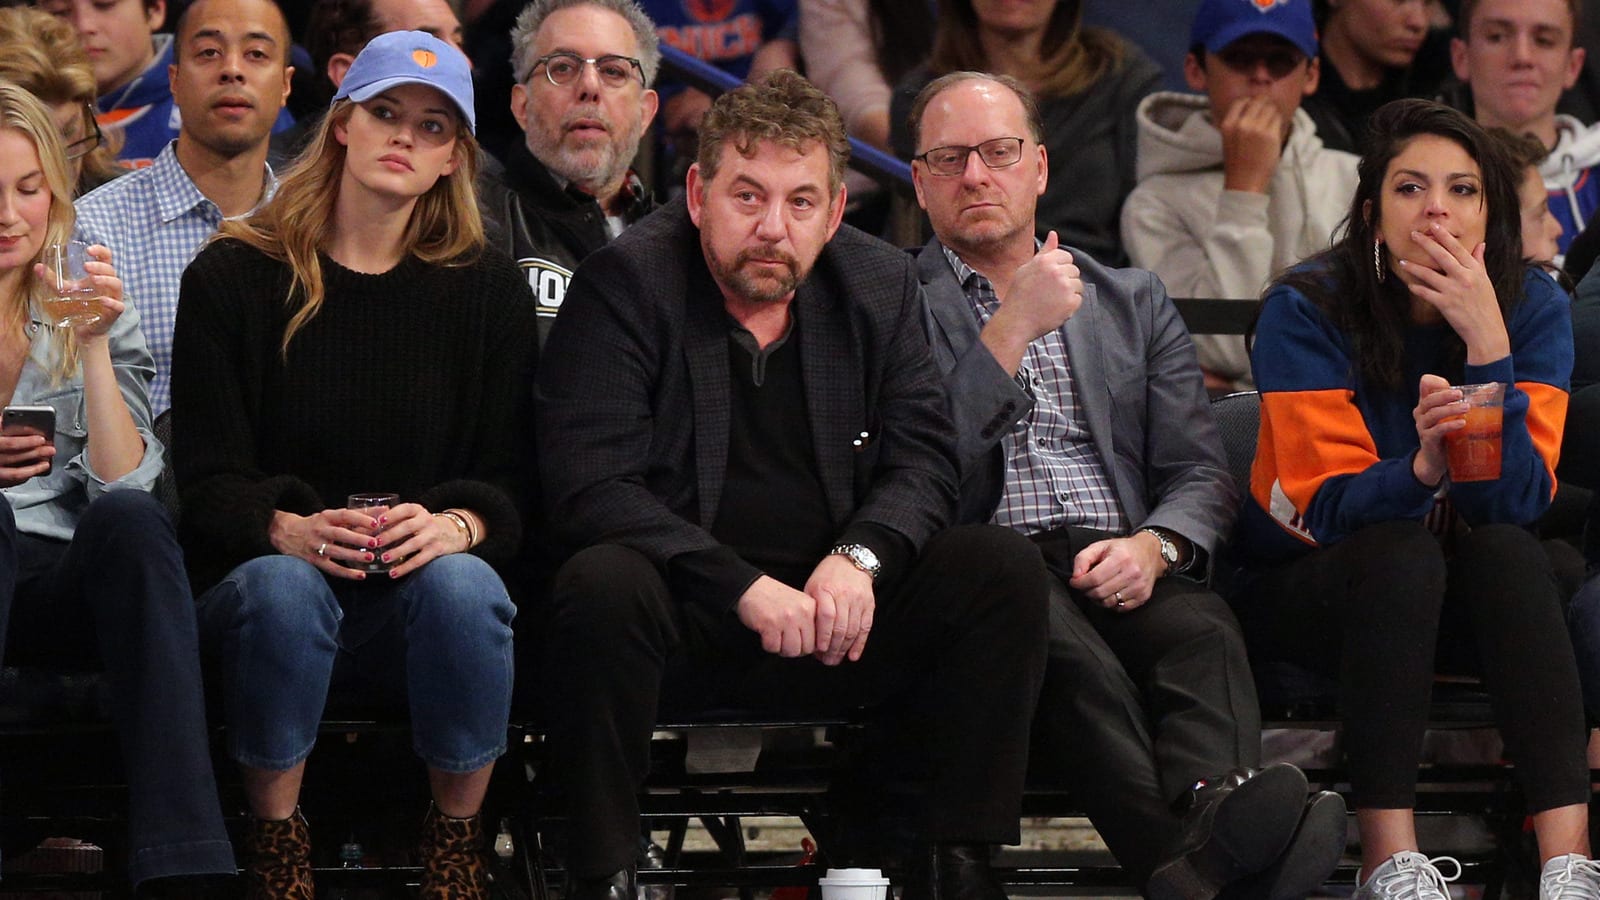 Knicks fan explains his side of confrontation with James Dolan